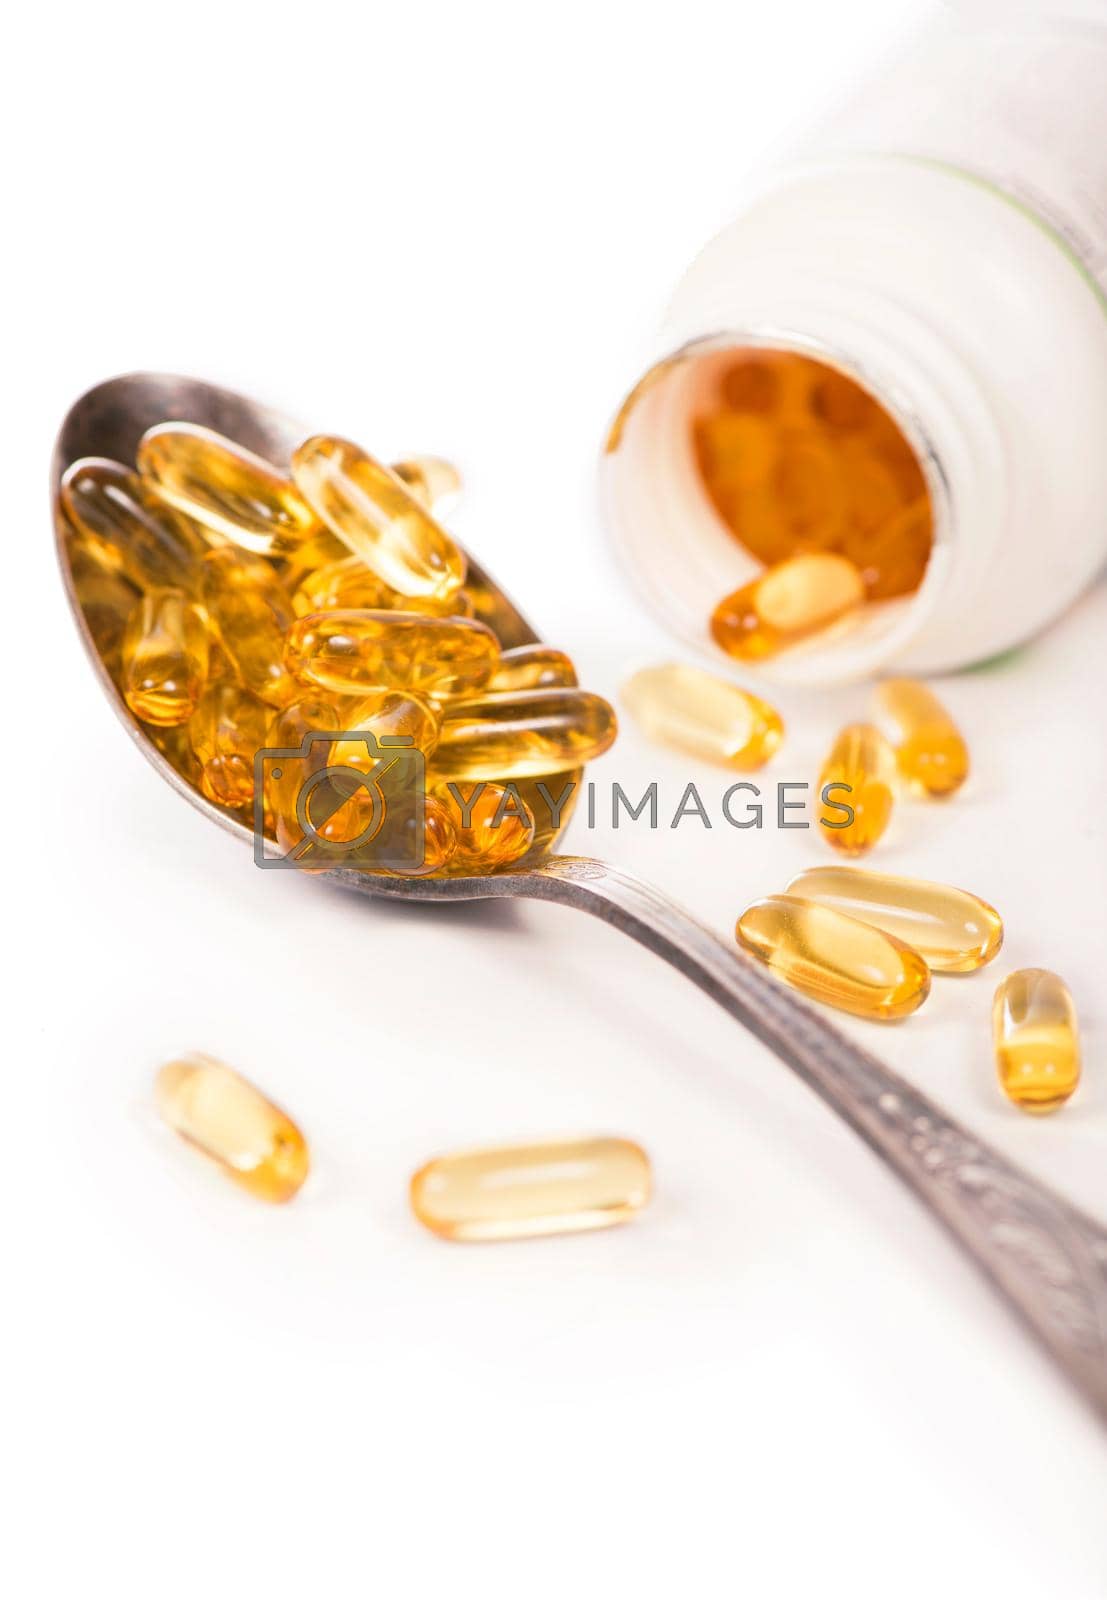 Royalty free image of Omega 3 pills ,Fish oil capsules with omega 3 and vitamin D on white background by aprilphoto